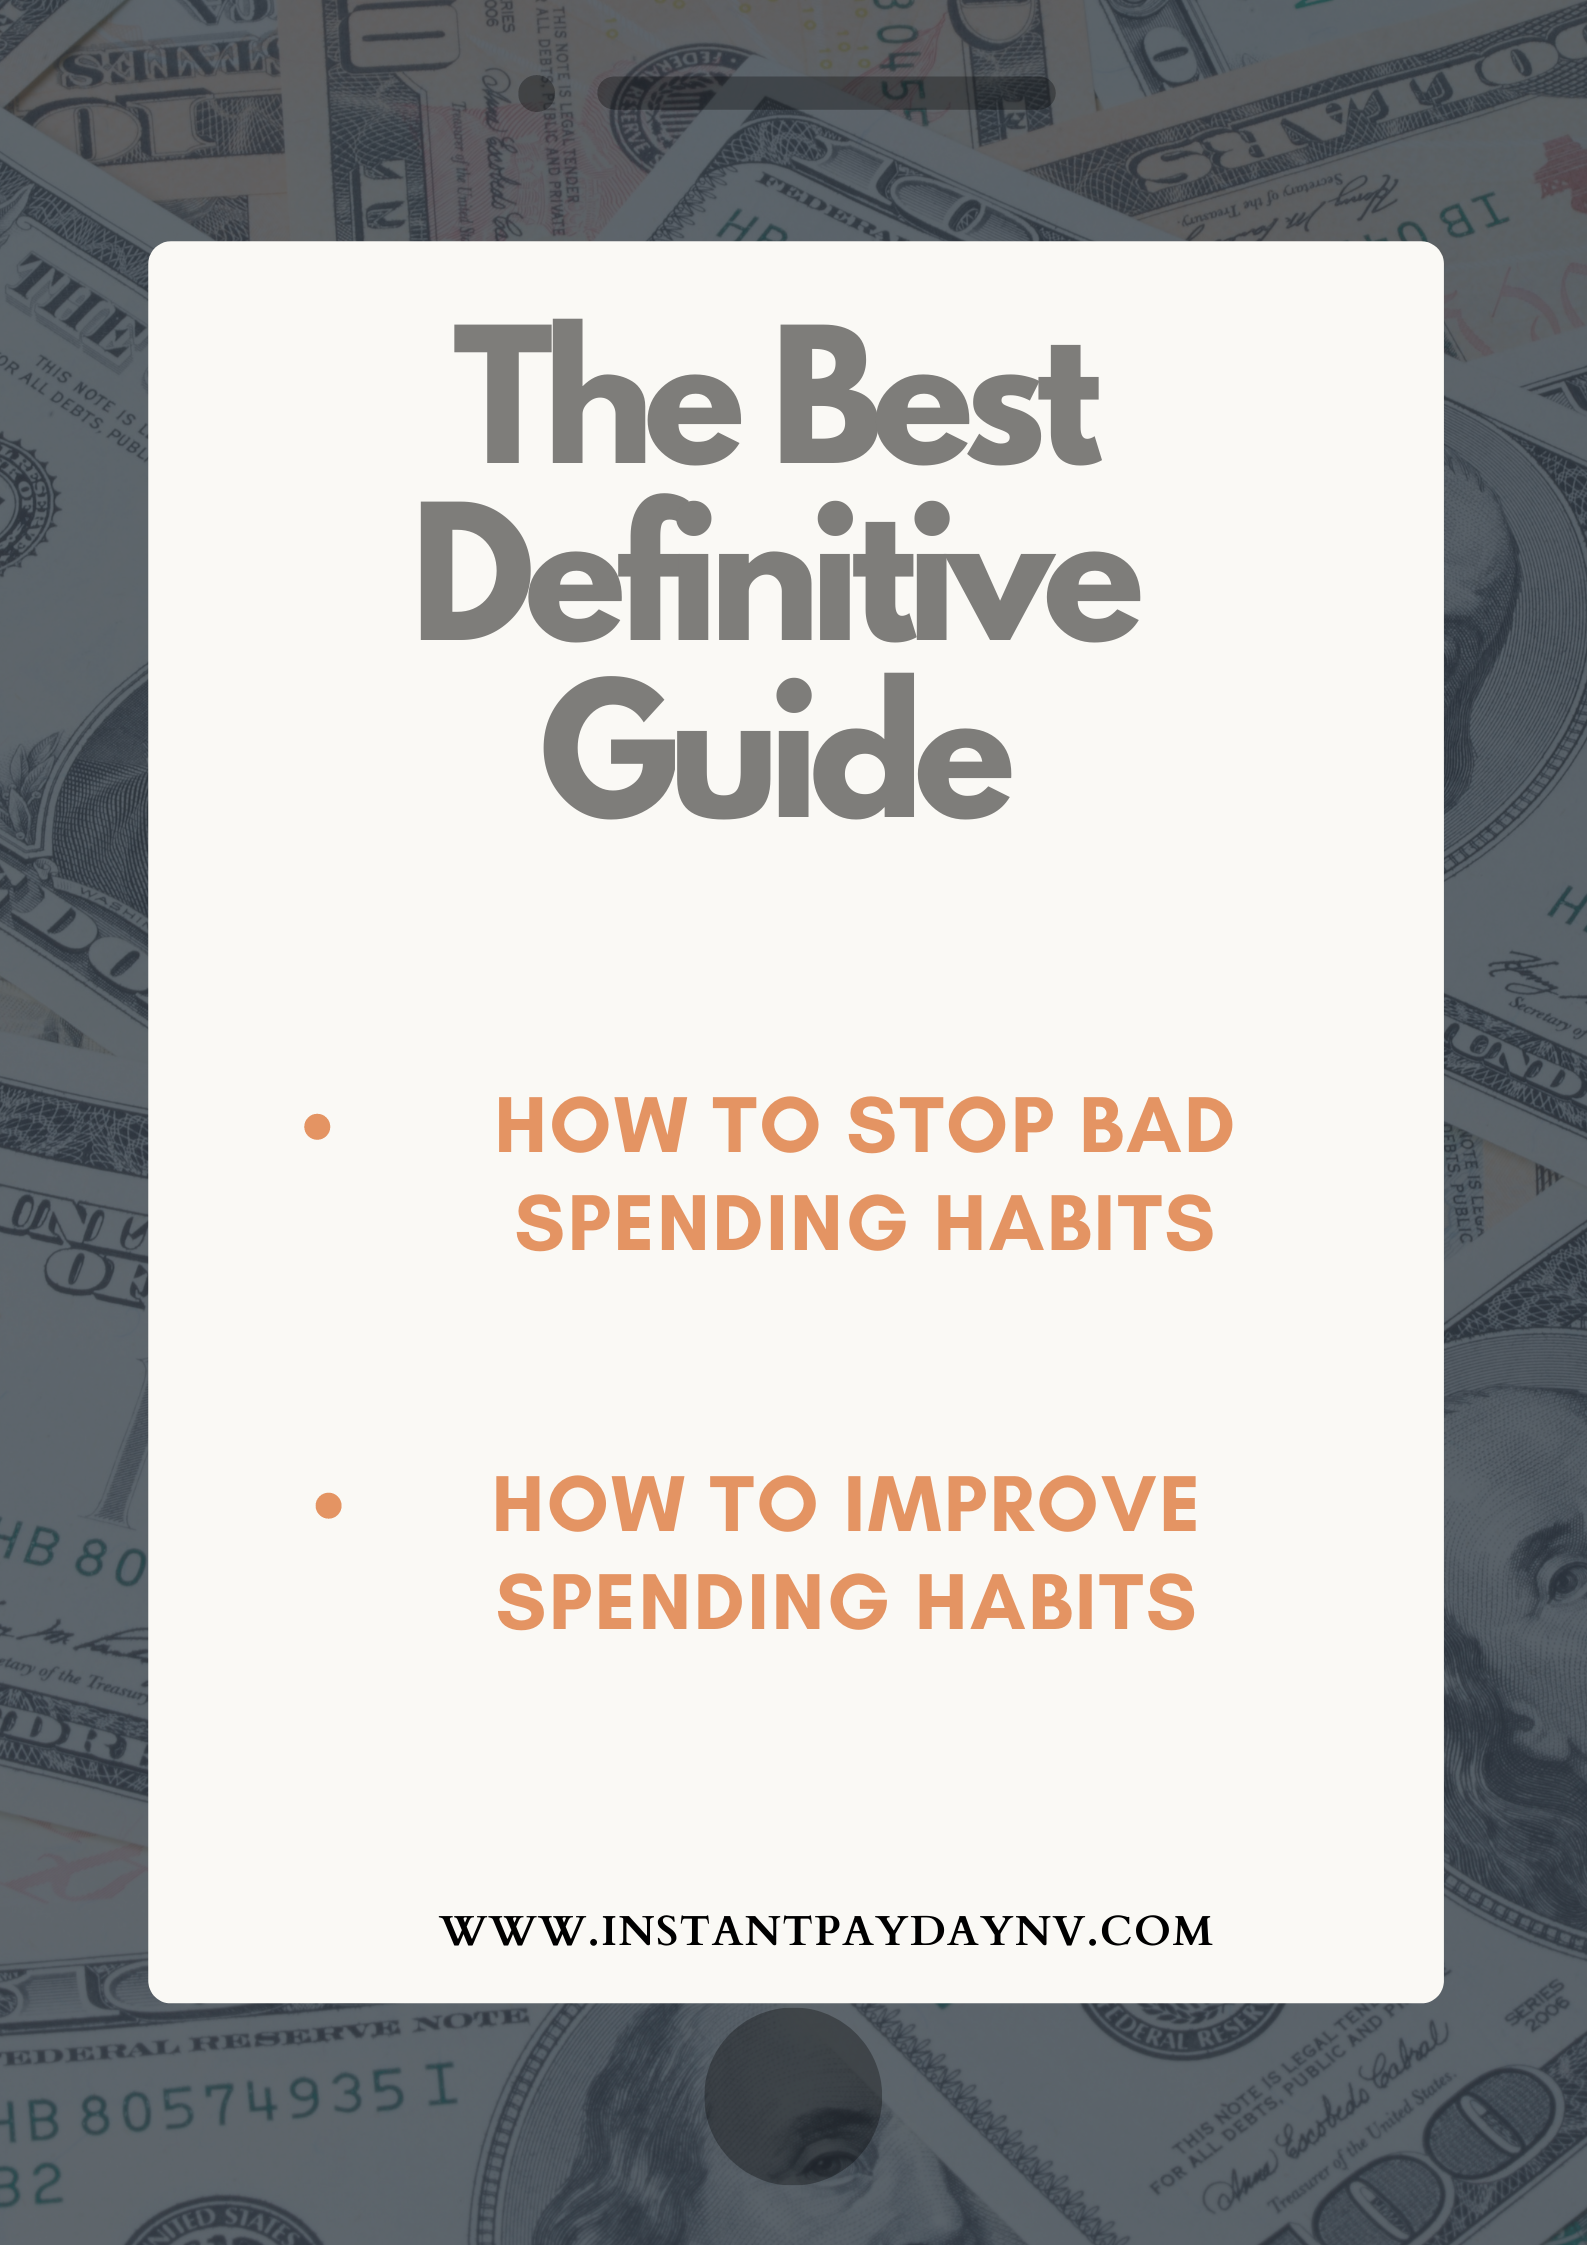 The Best Definitive Guide